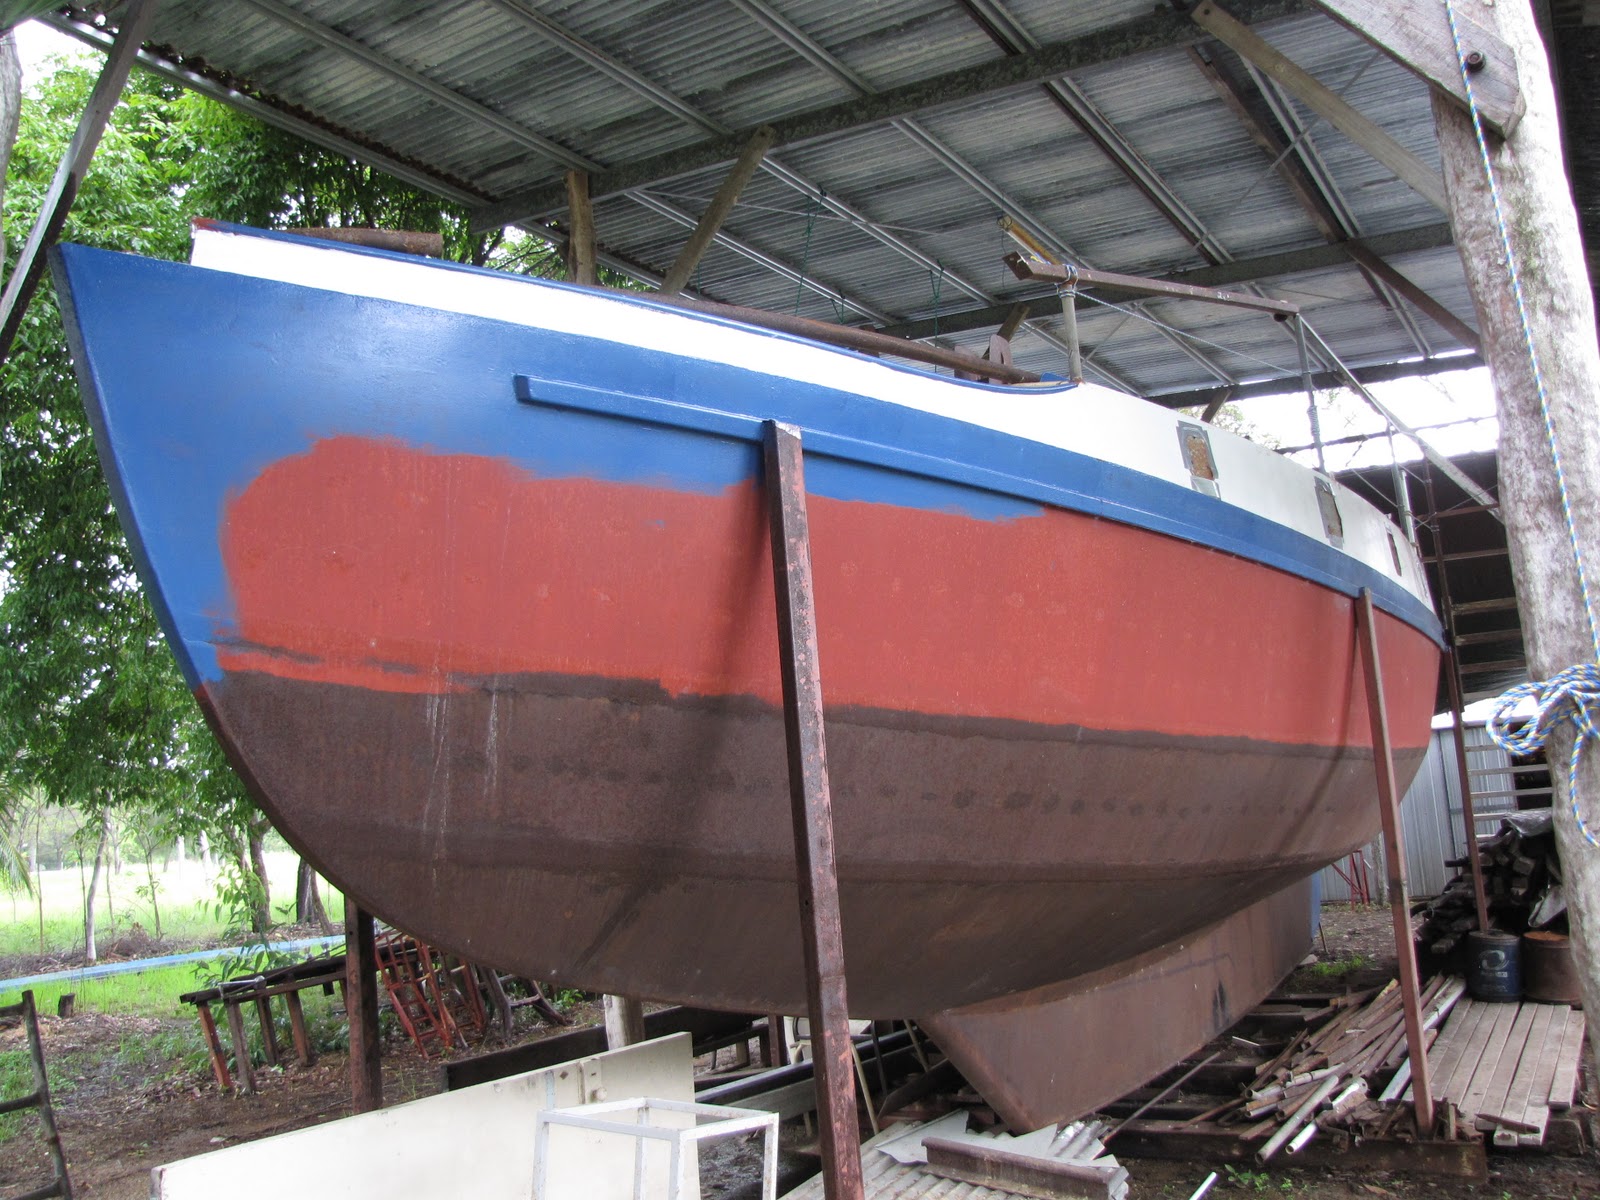 goes boat: buy small steel sailboat plans